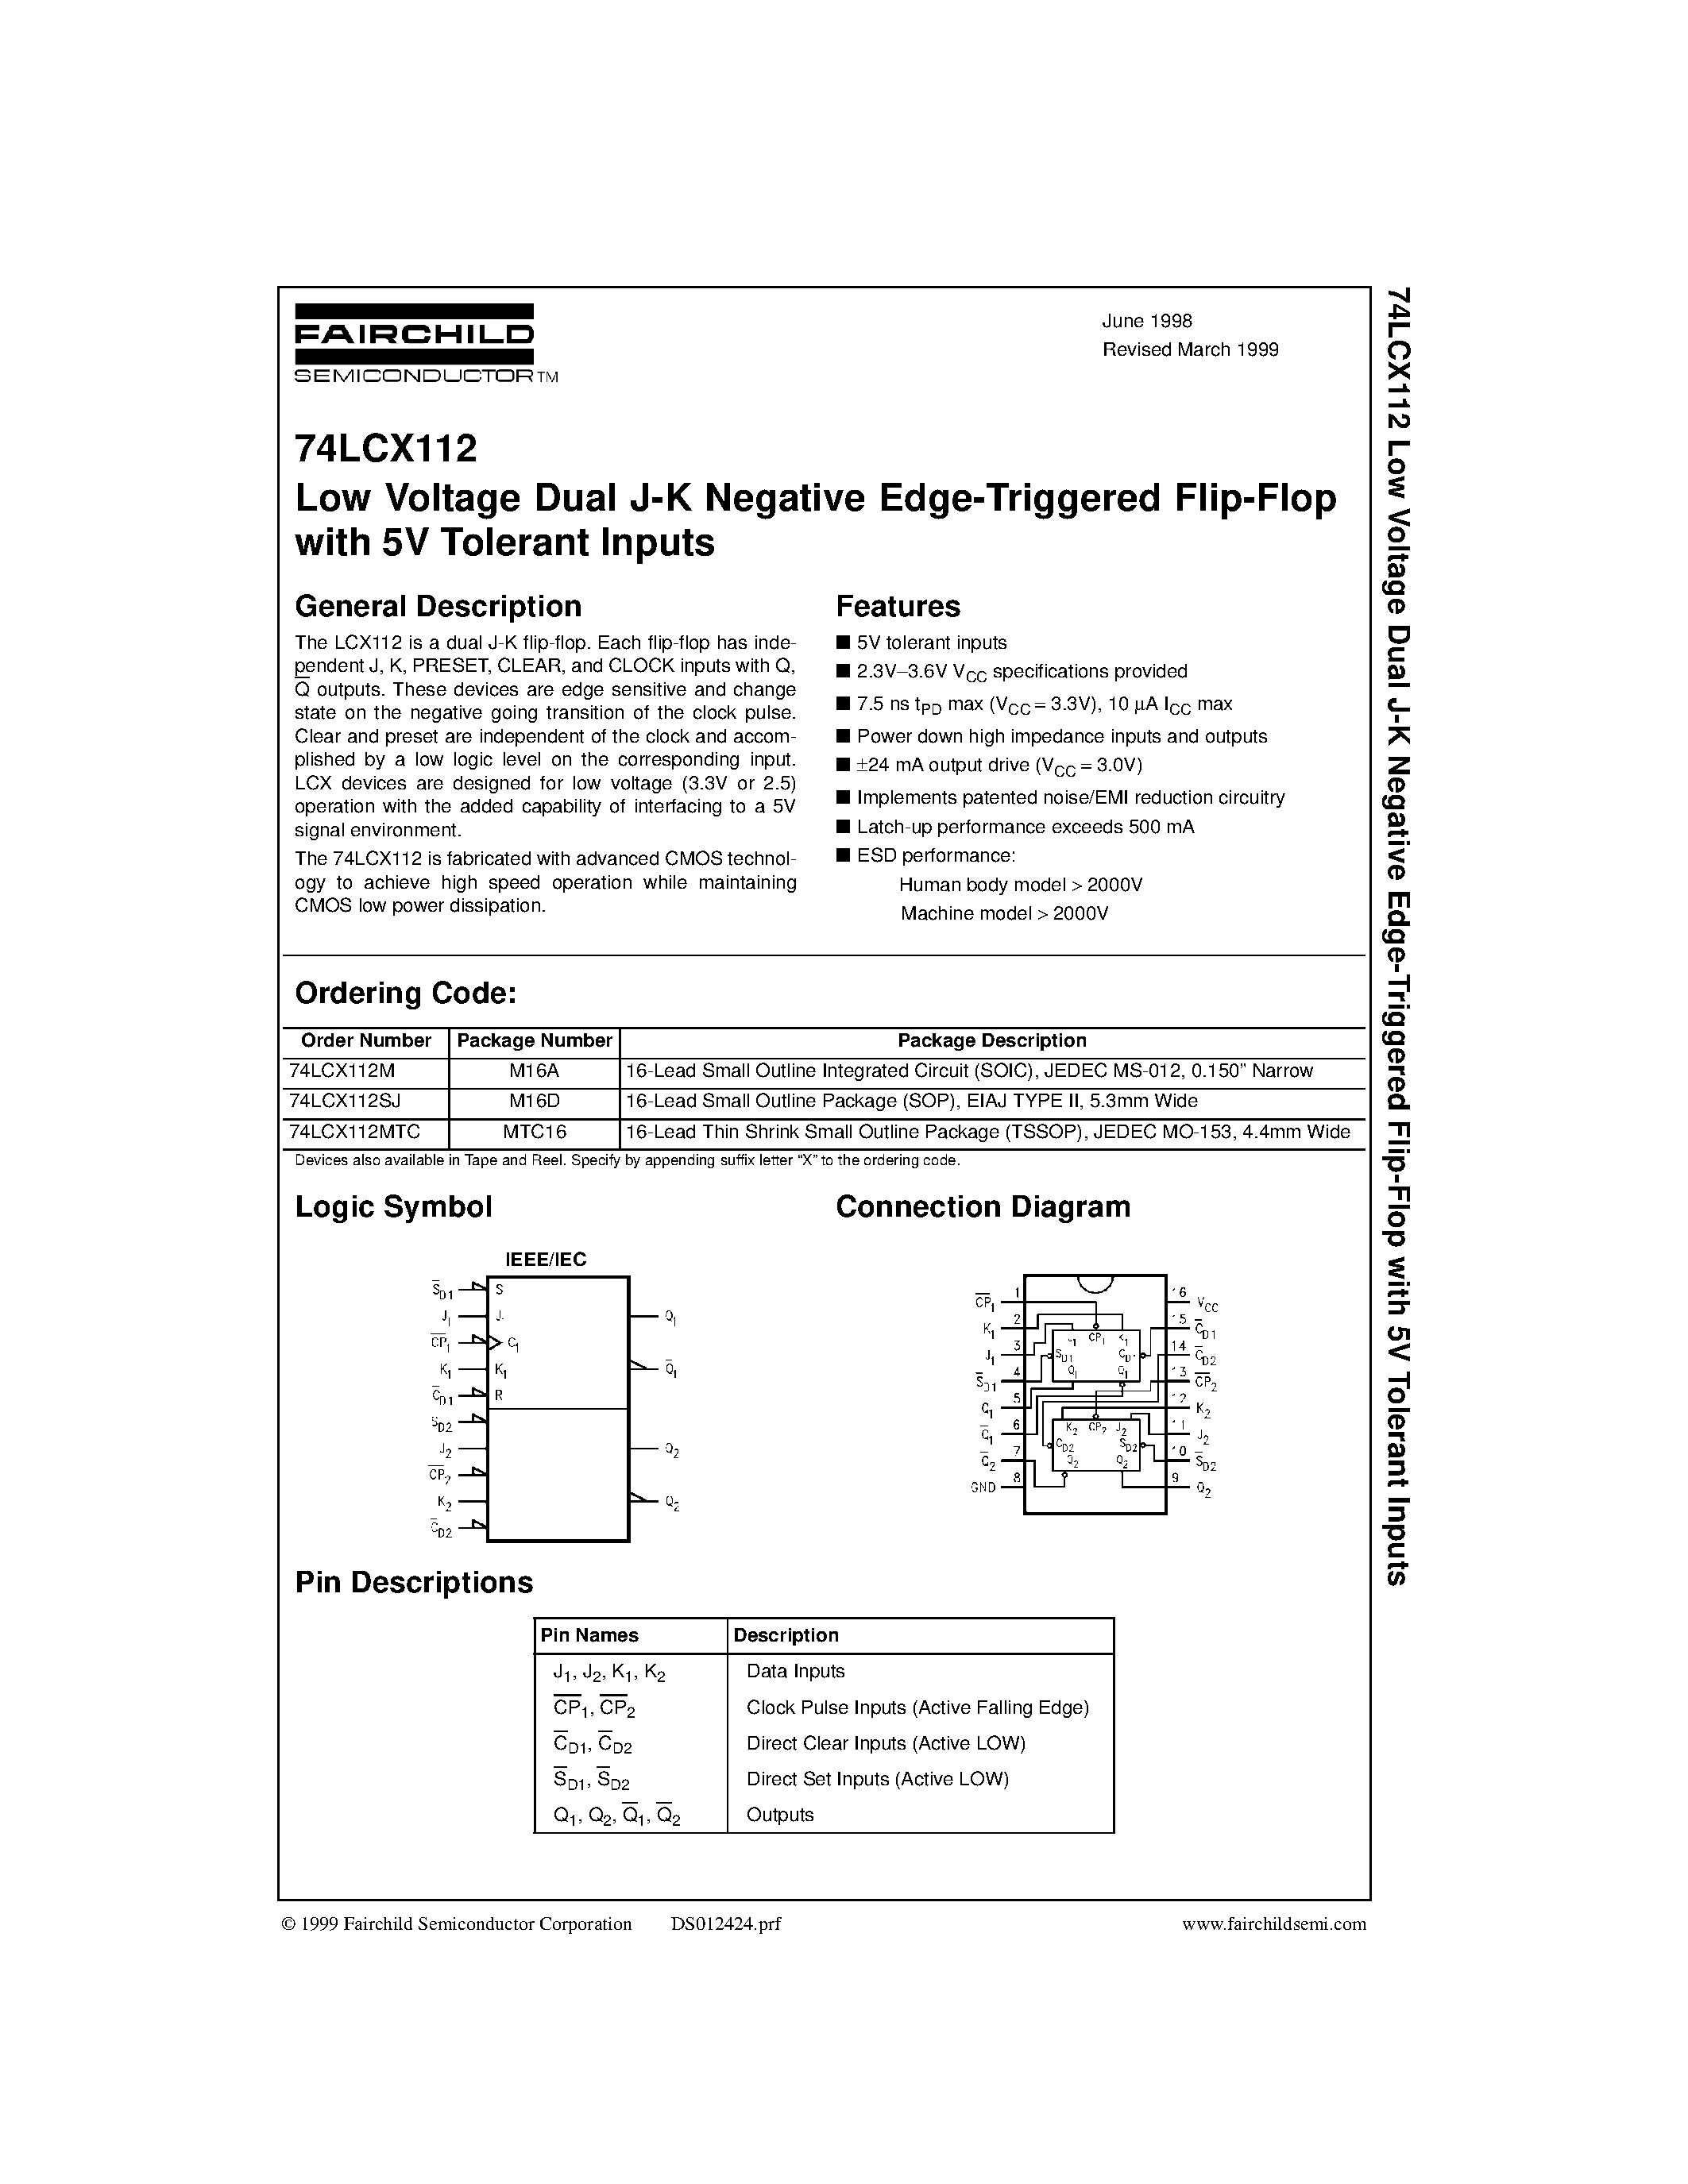 Datasheet 74LCX112MTC - Low Voltage Dual J-K Negative Edge-Triggered Flip-Flop with 5V Tolerant Inputs page 1